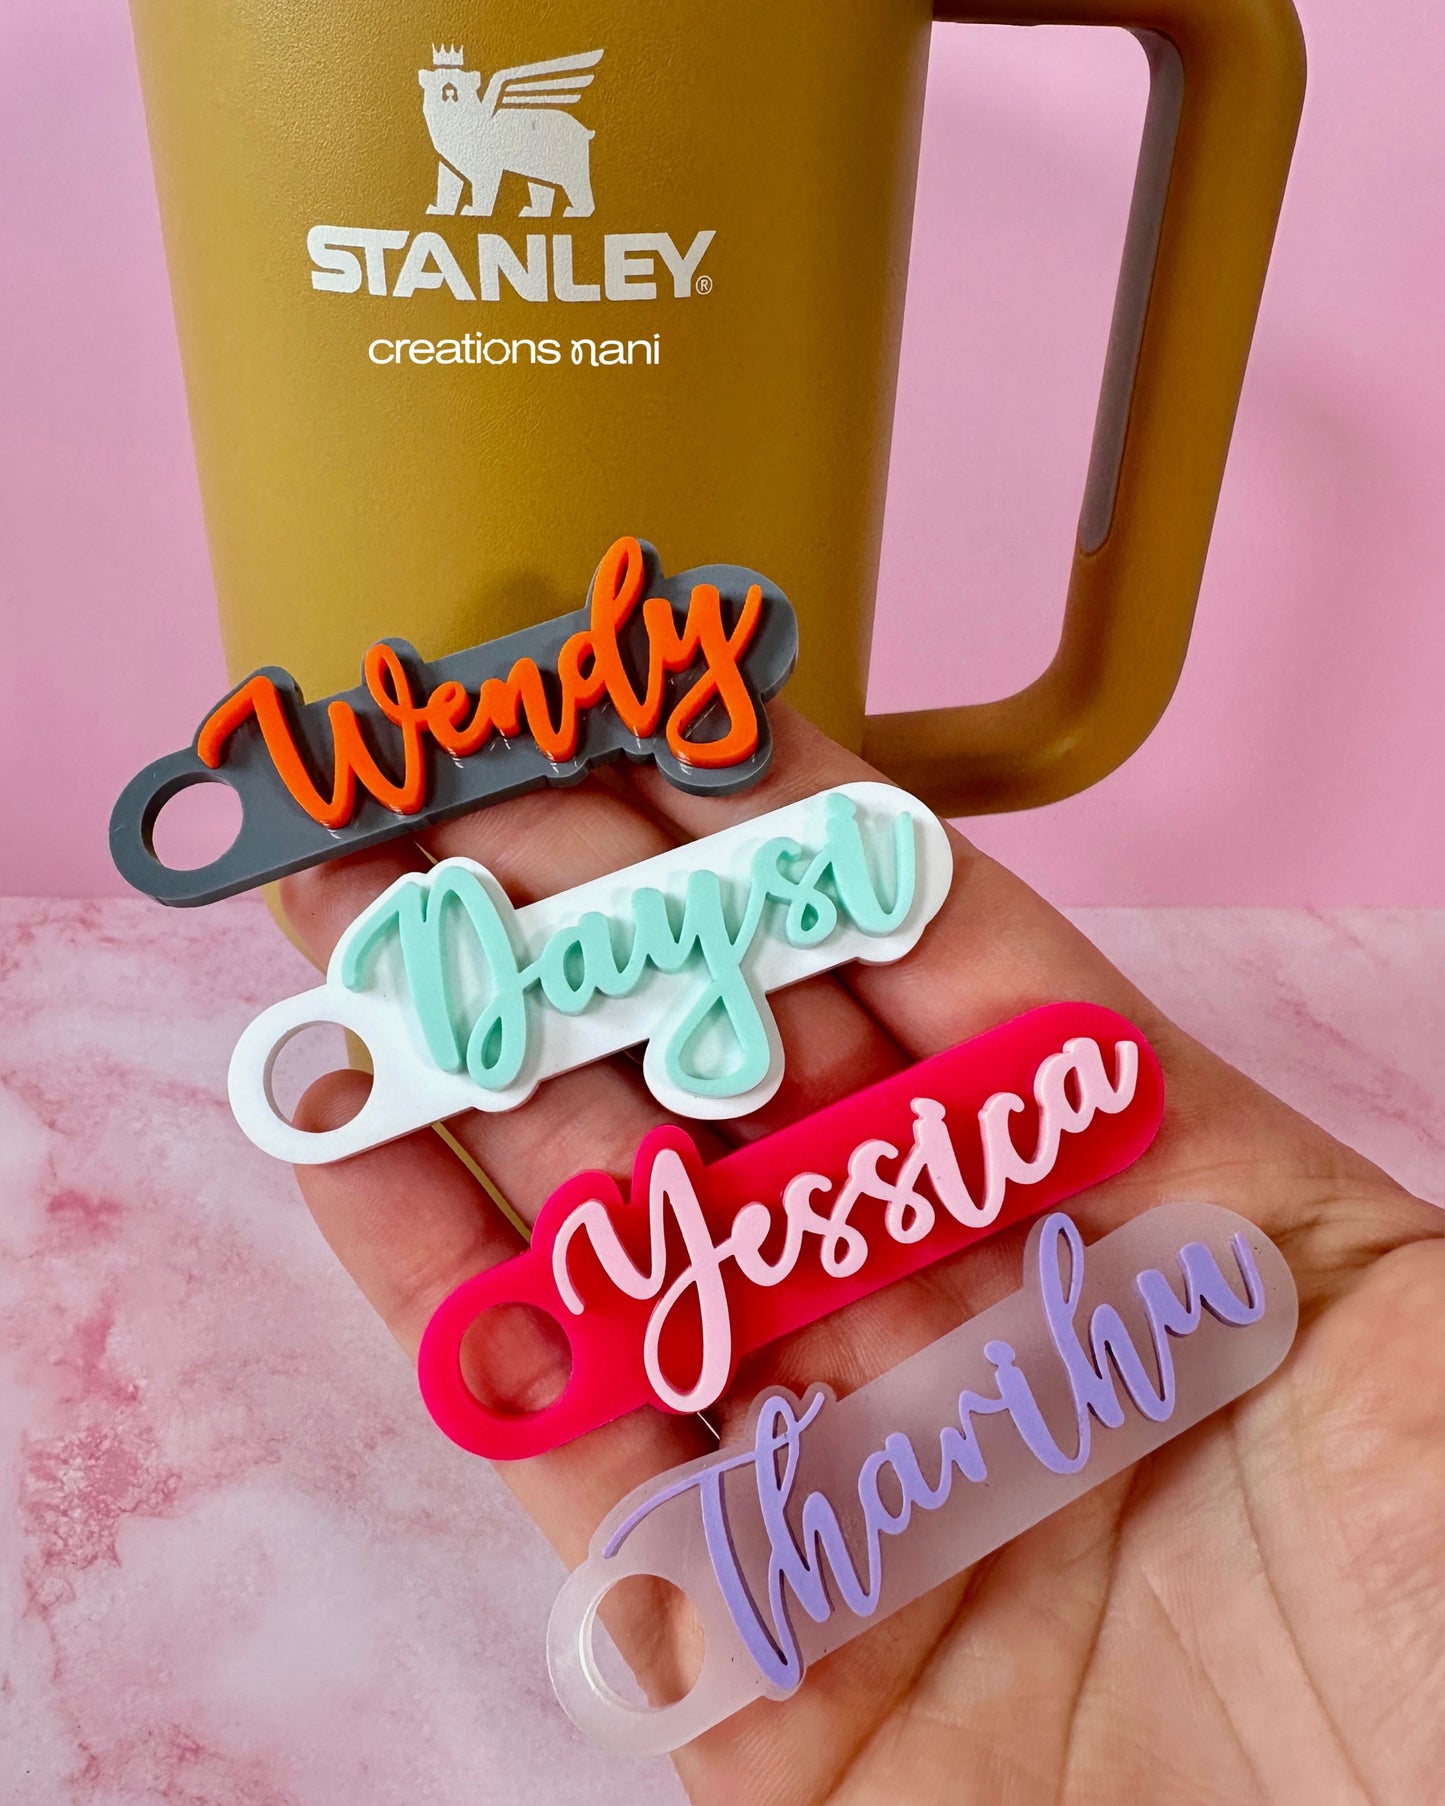 30 oz - Stanley Name Plate